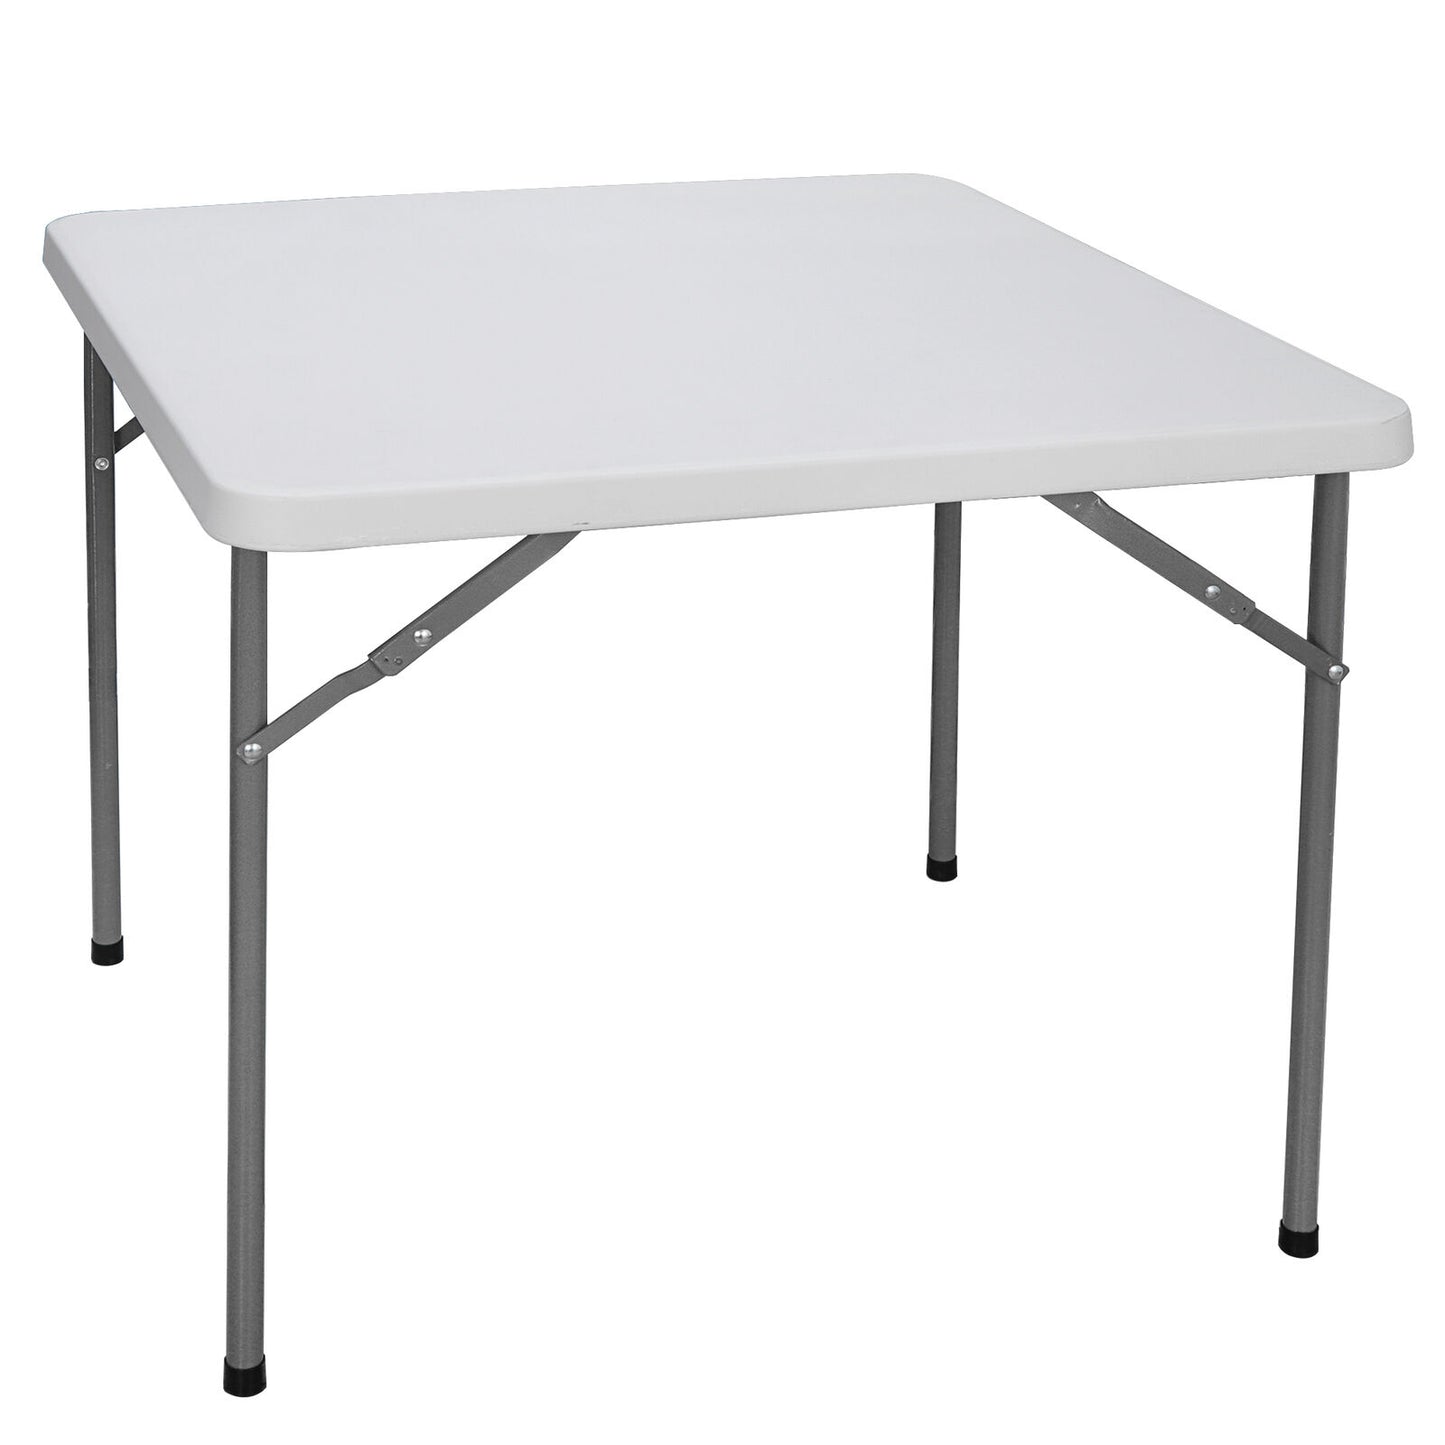 3ft Folding Table Portable Indoor Outdoor Picnic Party Camping Tables